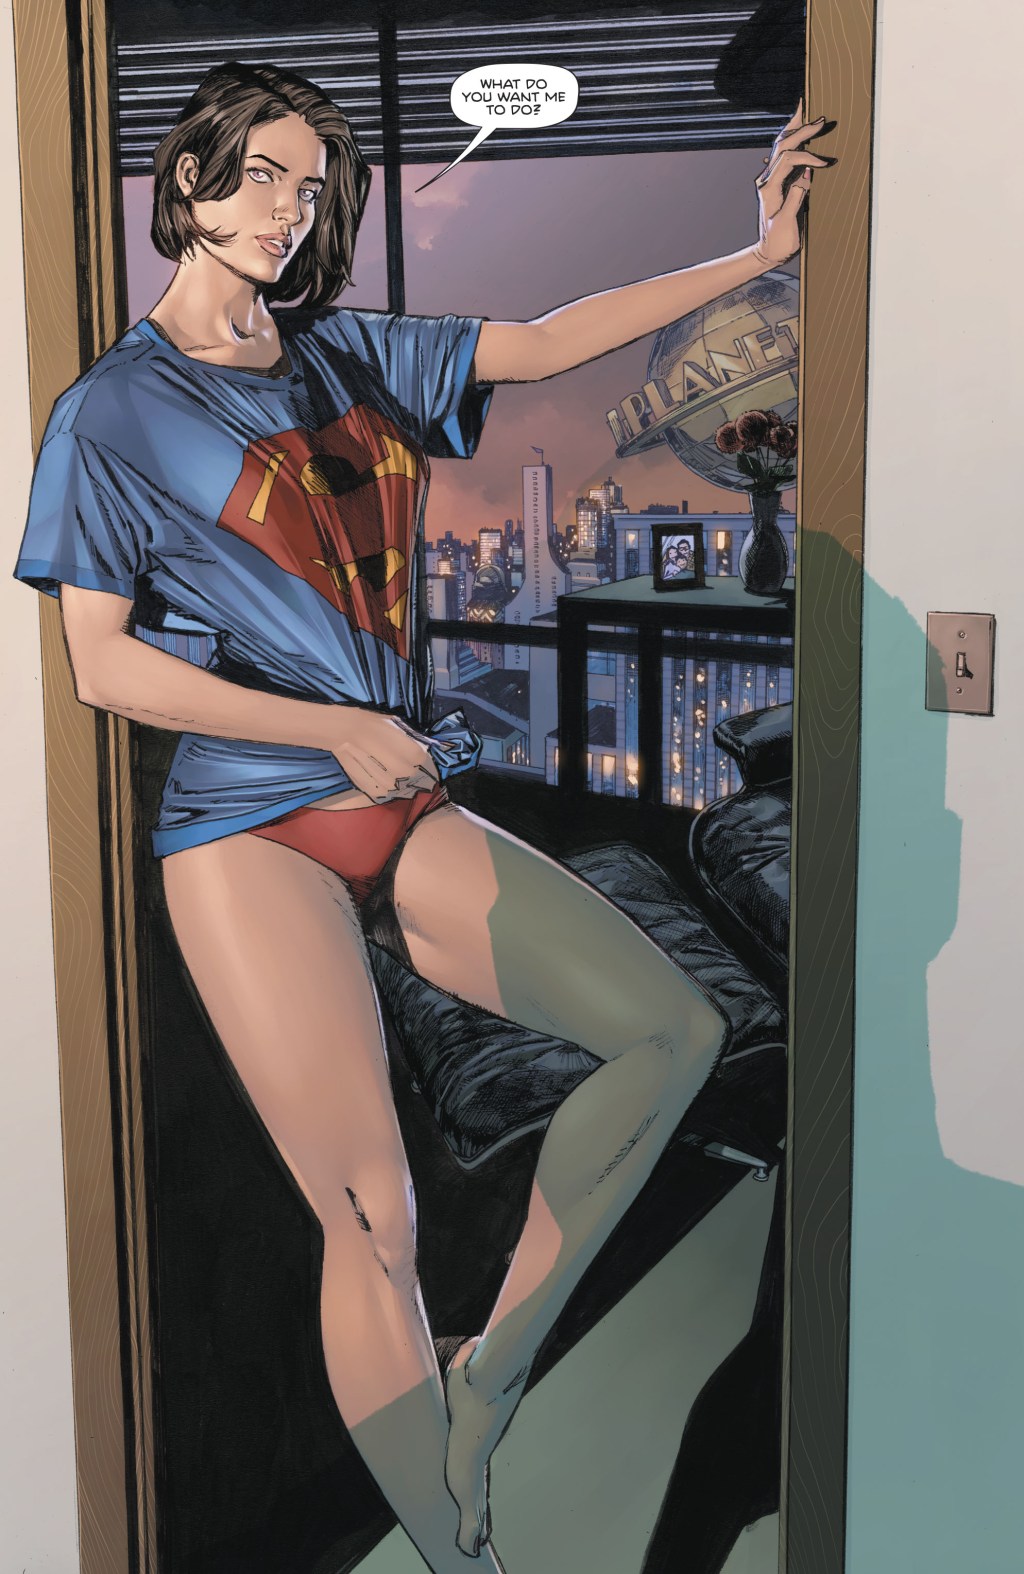 Lois Lane offers her help to Superman in Heroes in Crisis Vol. 1 #4 "Part 4: $%@# This" (2019), DC. Words by Tom King, art by Clay Mann, Tomeu Morey, and Clayton Cowles.